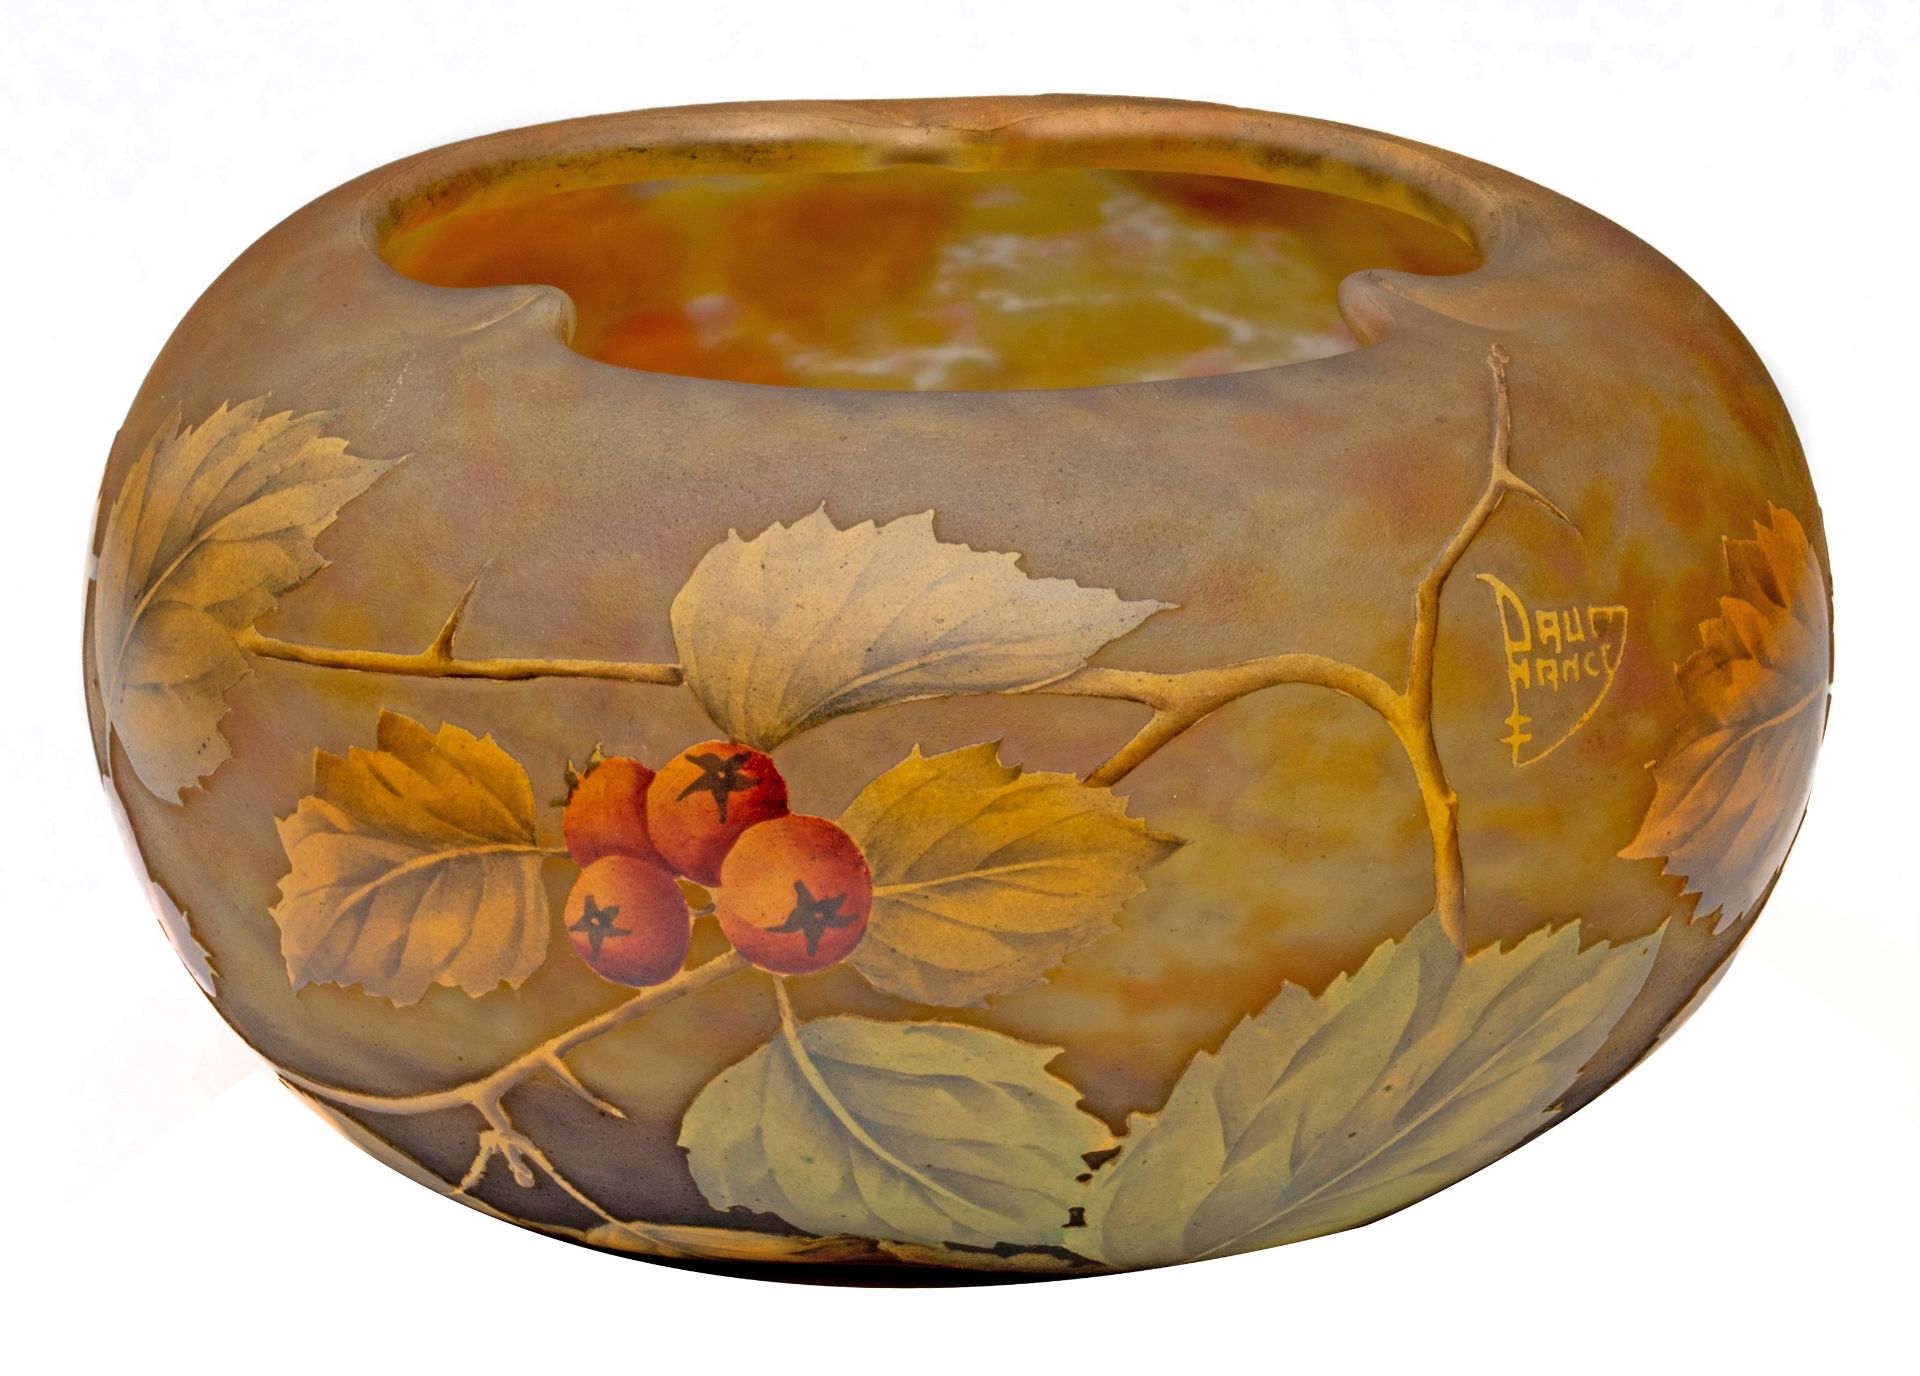 (BIDDING ONLY ON CARLOBONTE.BE) A large Art Nouveau style cameo glass paste bowl with floral decorat